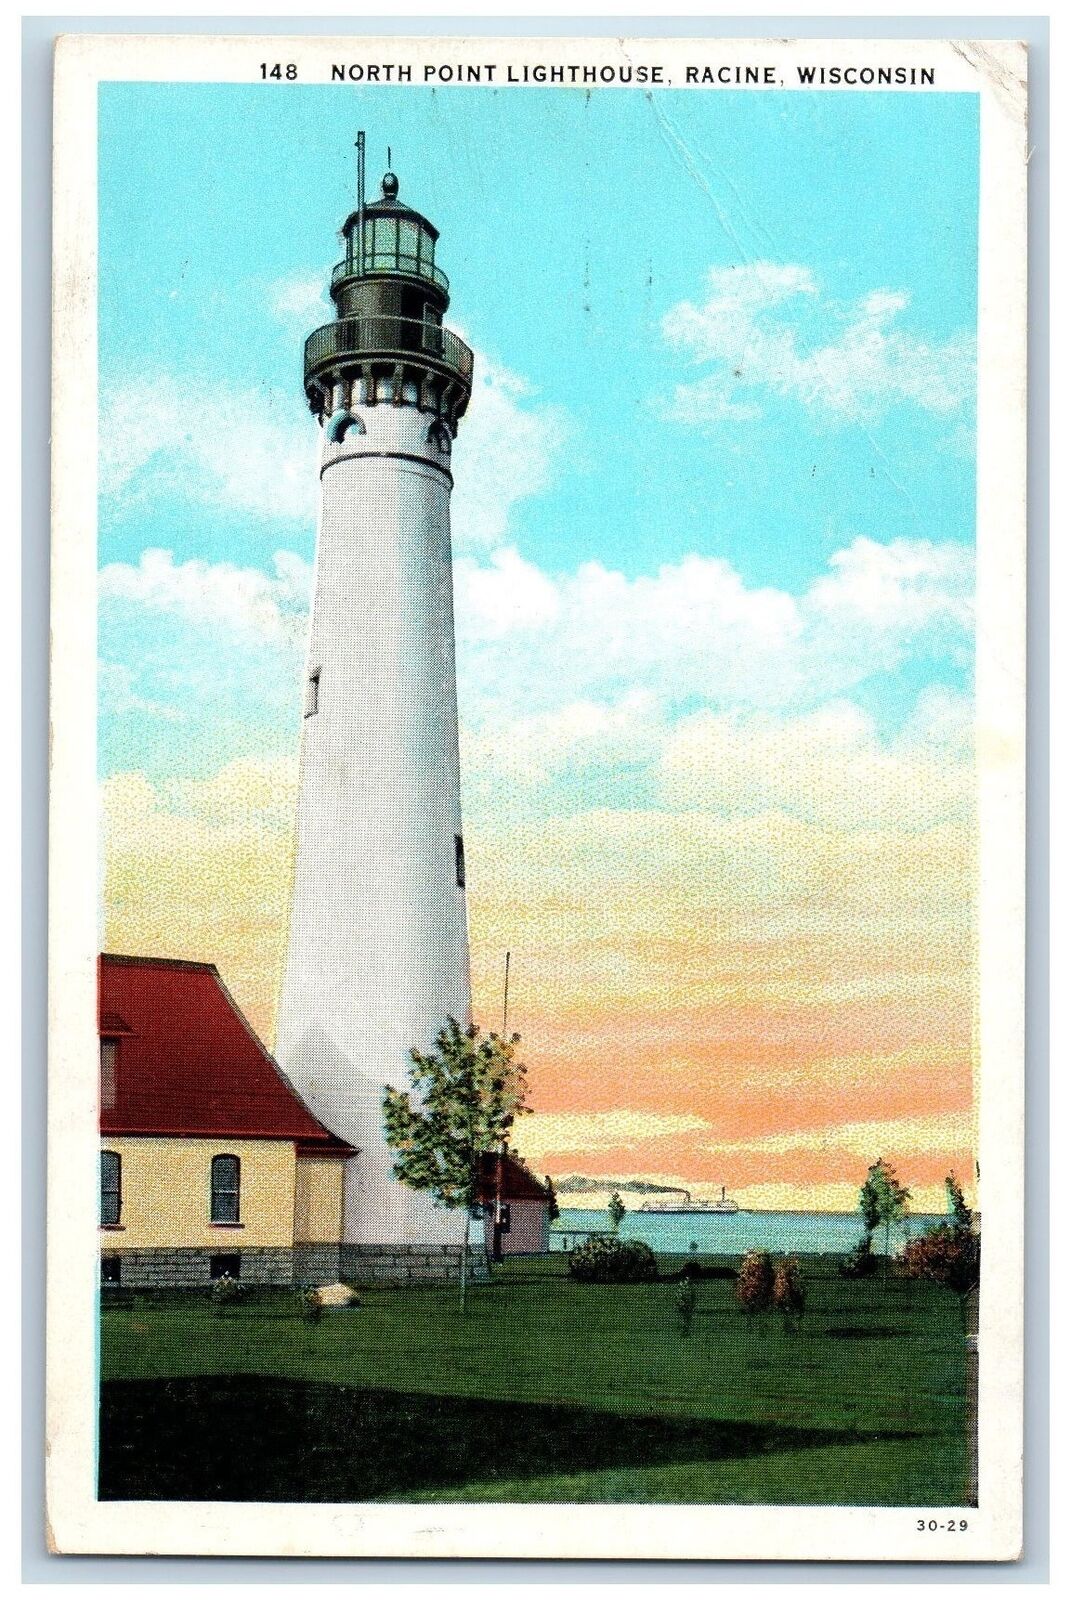 c1920's North Point Lighthouse Concrete Tower Steamer Racine Wisconsin Postcard